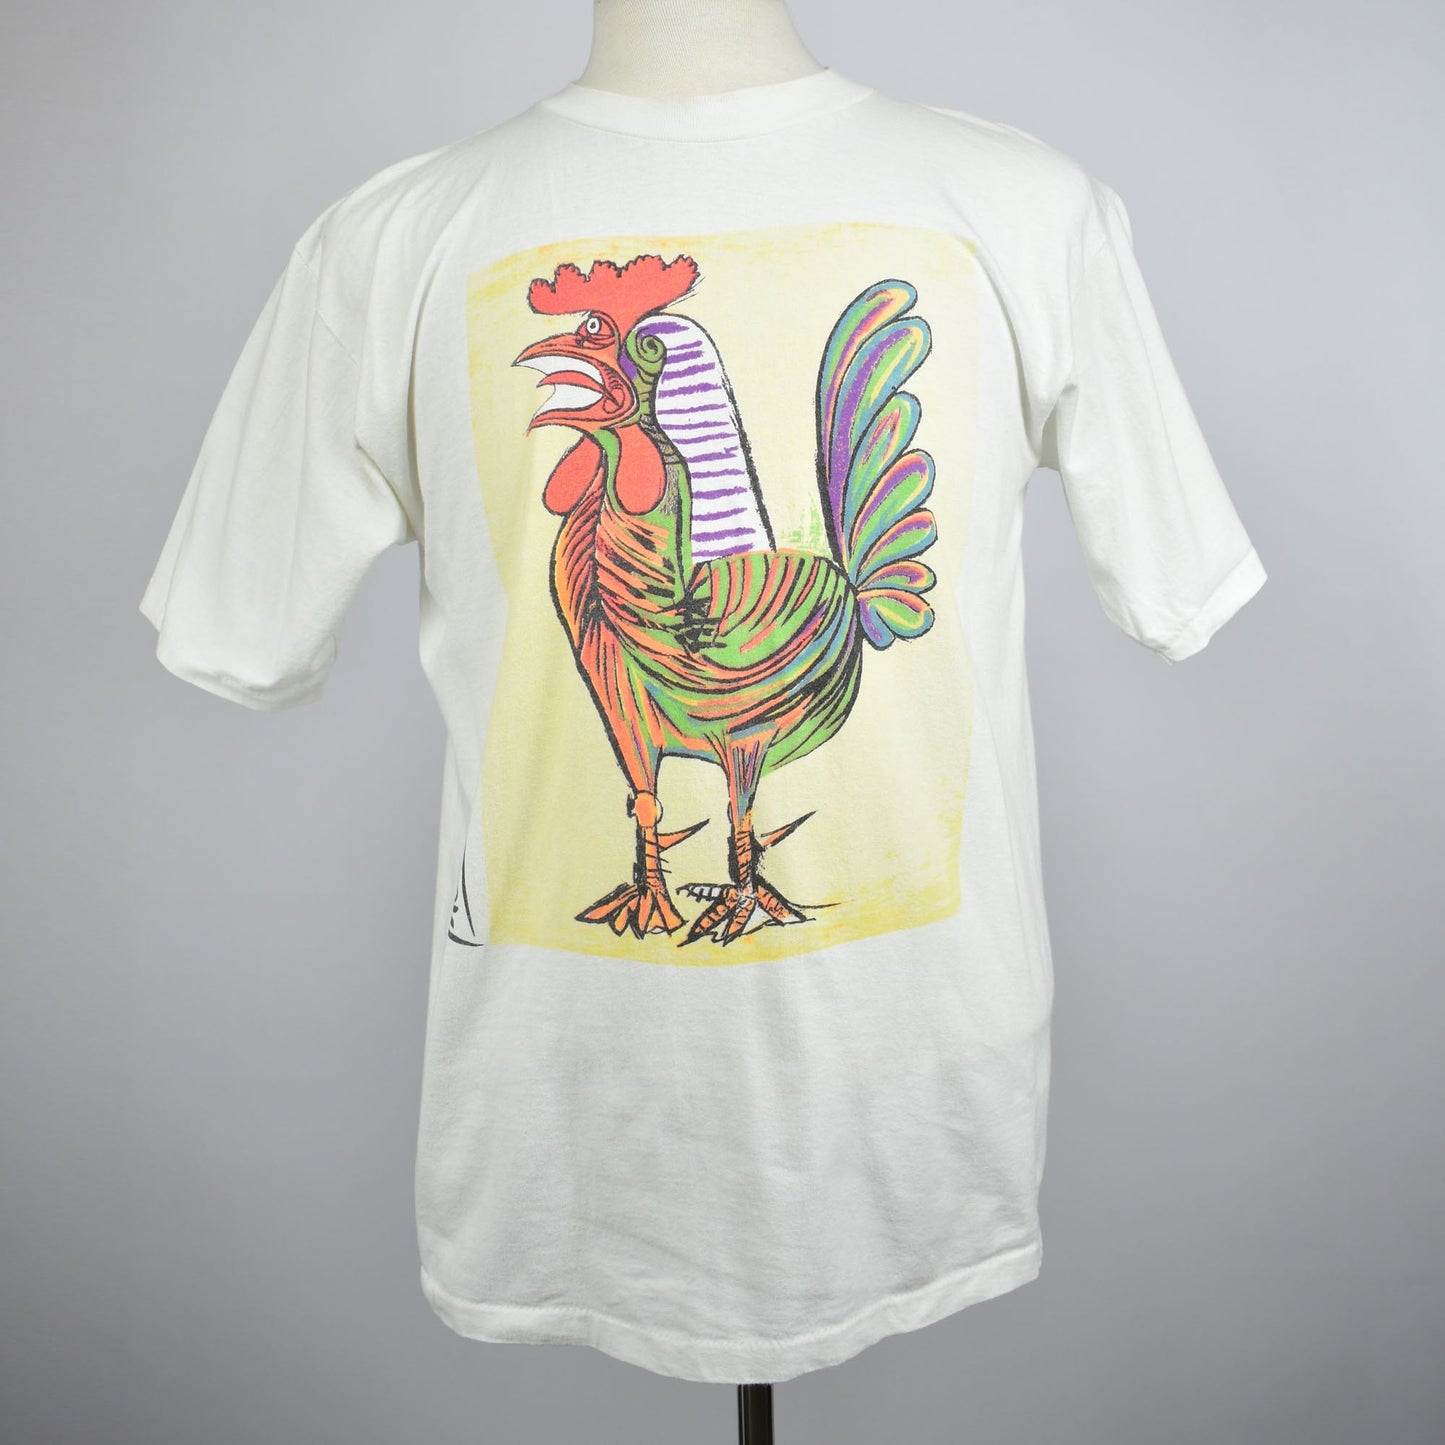 Vintage 1988 "The Rooster" Picasso Tee Made in USA 100% Cotton- Size L